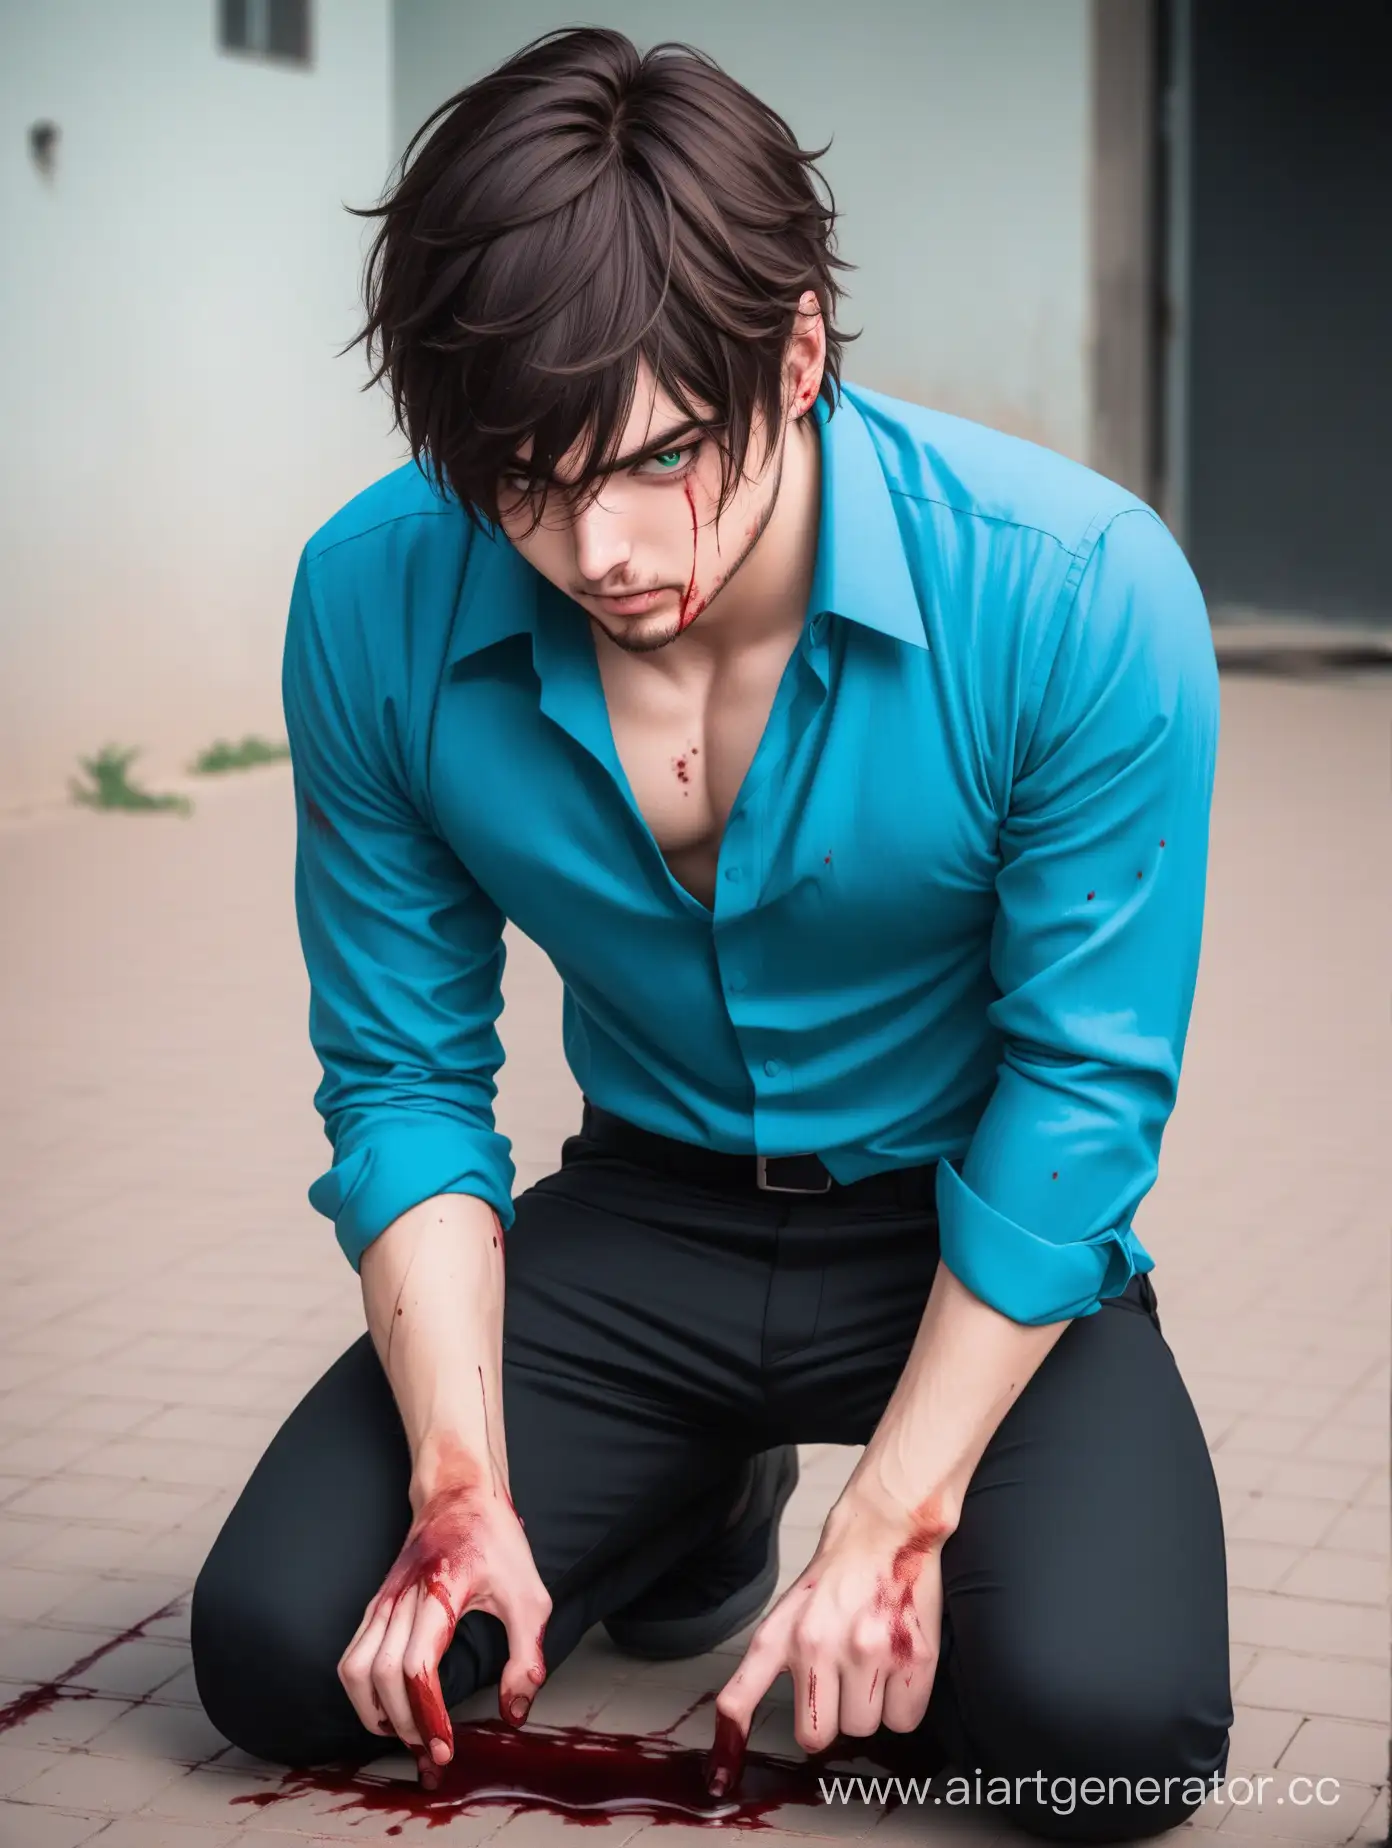 Brunette-Man-Examining-Bloodied-Hands-in-Blue-Shirt-and-Black-Pants